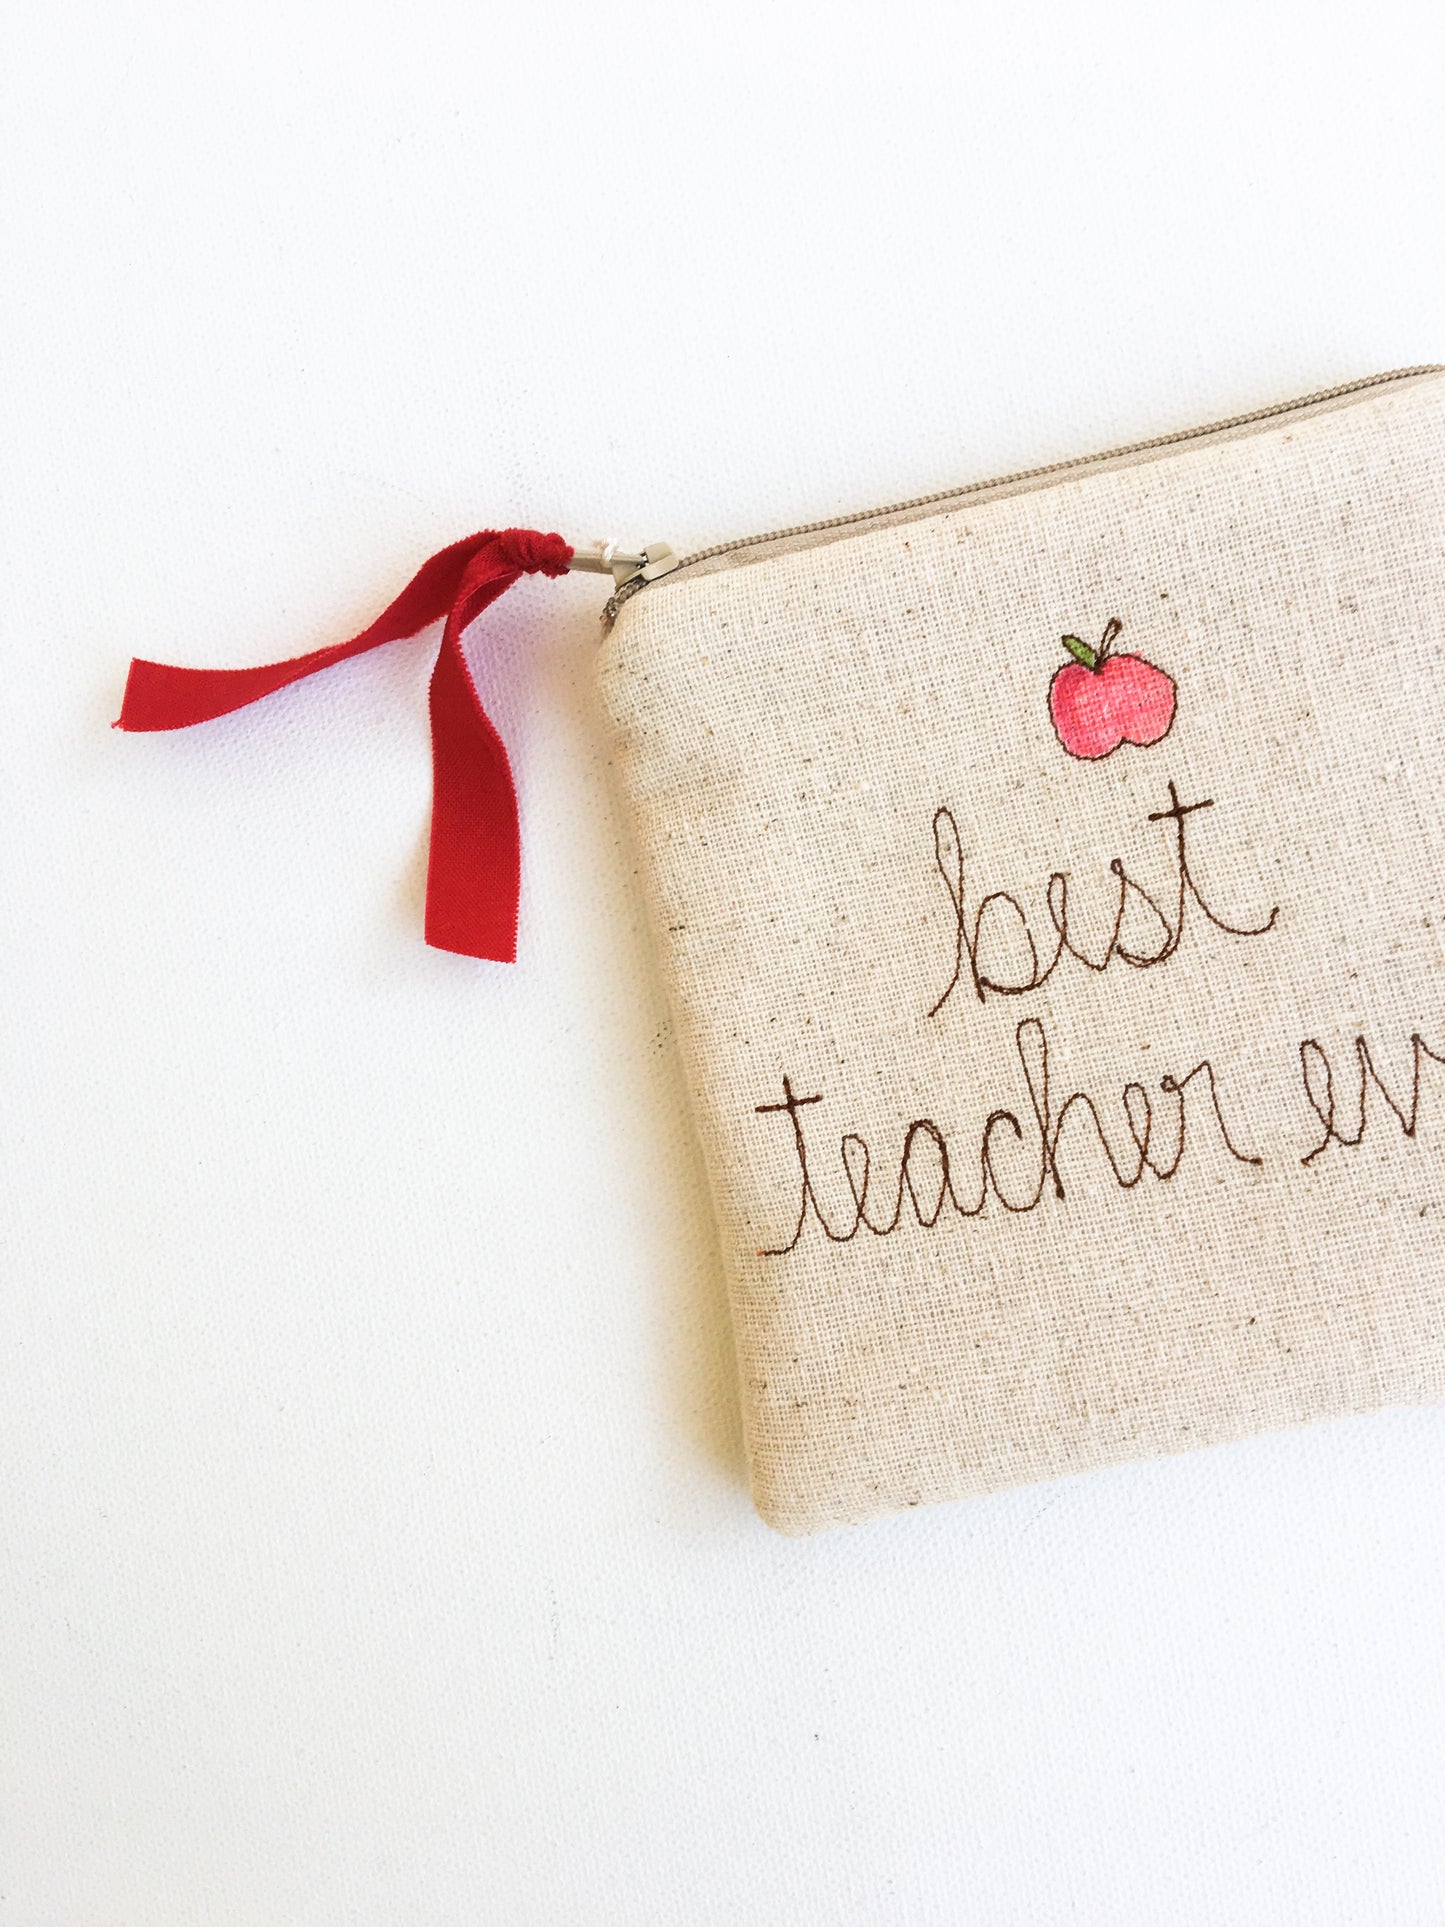 Personalized Teacher Gift